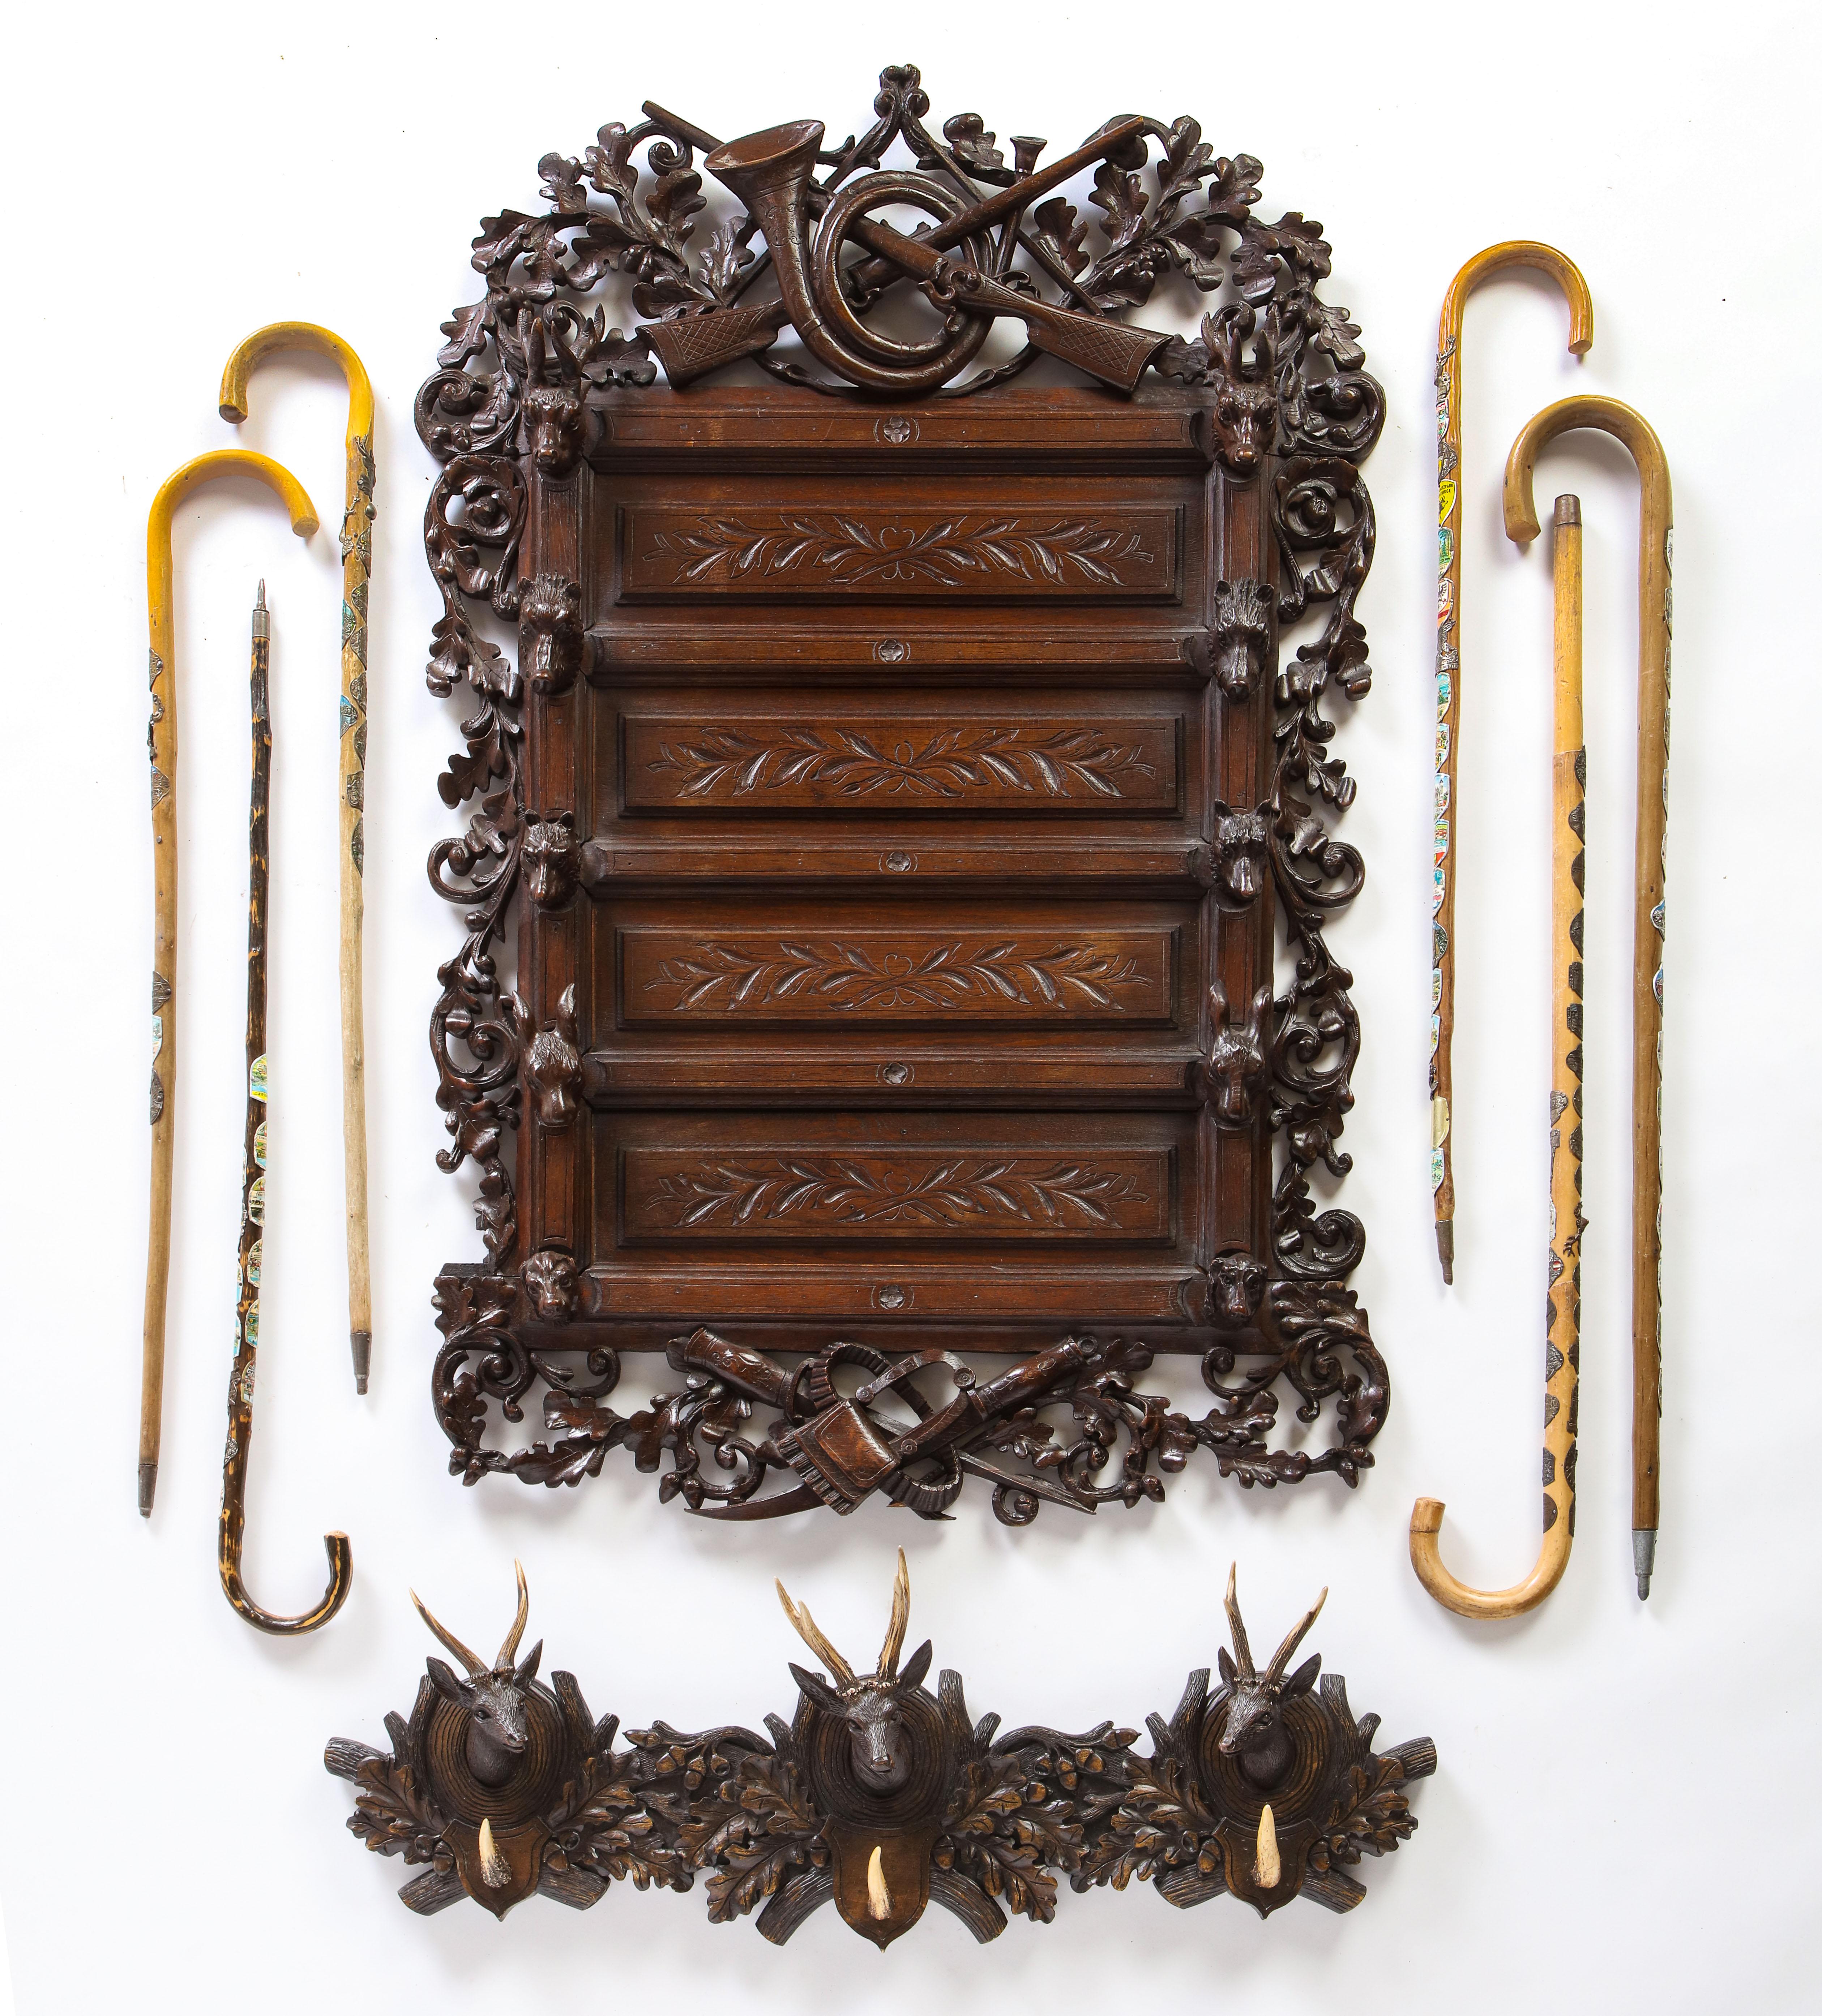 A stately Swiss ‘Black Forest’ wall-mounted walking stick stand dated to the mid-20th century is presented together with six walking sticks, and a Swiss 'Black Forest' carved wood and antler-mounted hanging coat rack. The carved wood decorations on